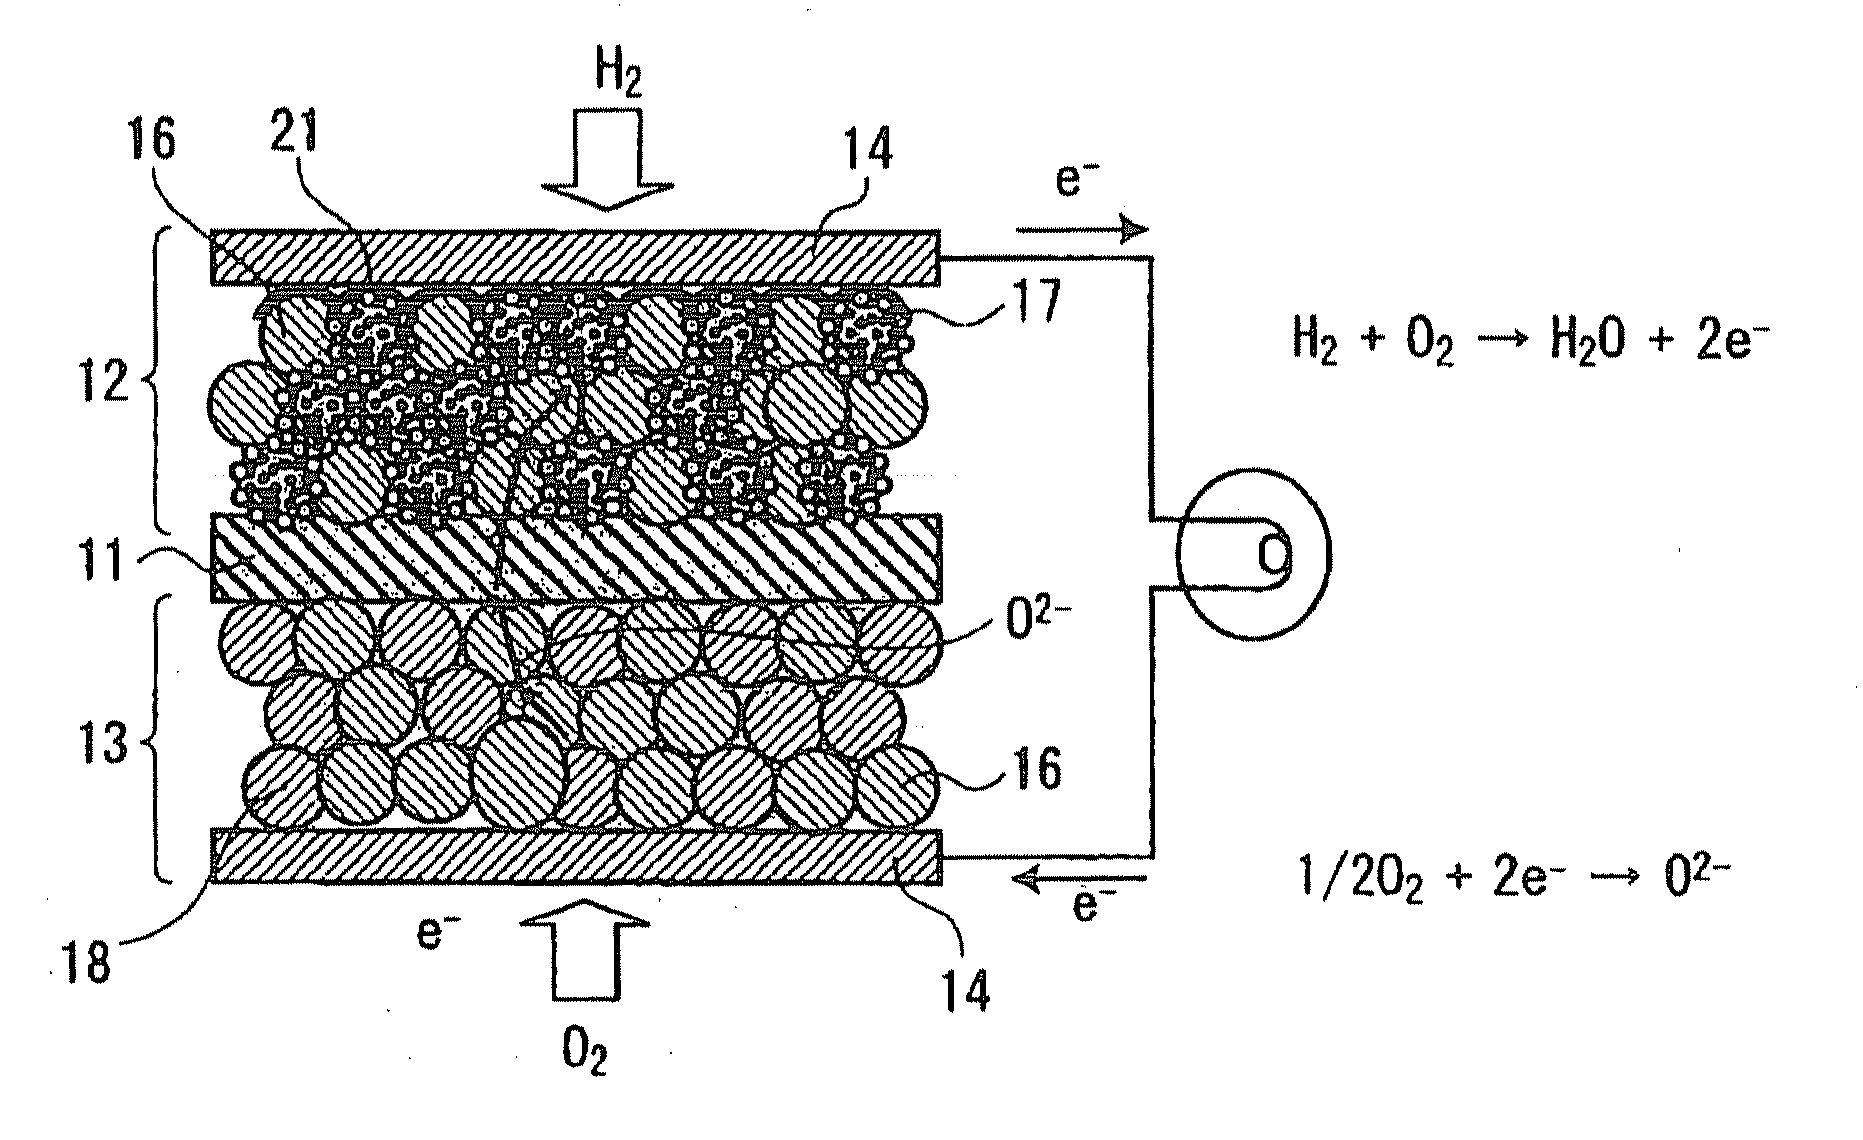 Fuel electrodes for solid oxide electrochemical cell, processes for producing the same, and solid oxide electrochemical cells